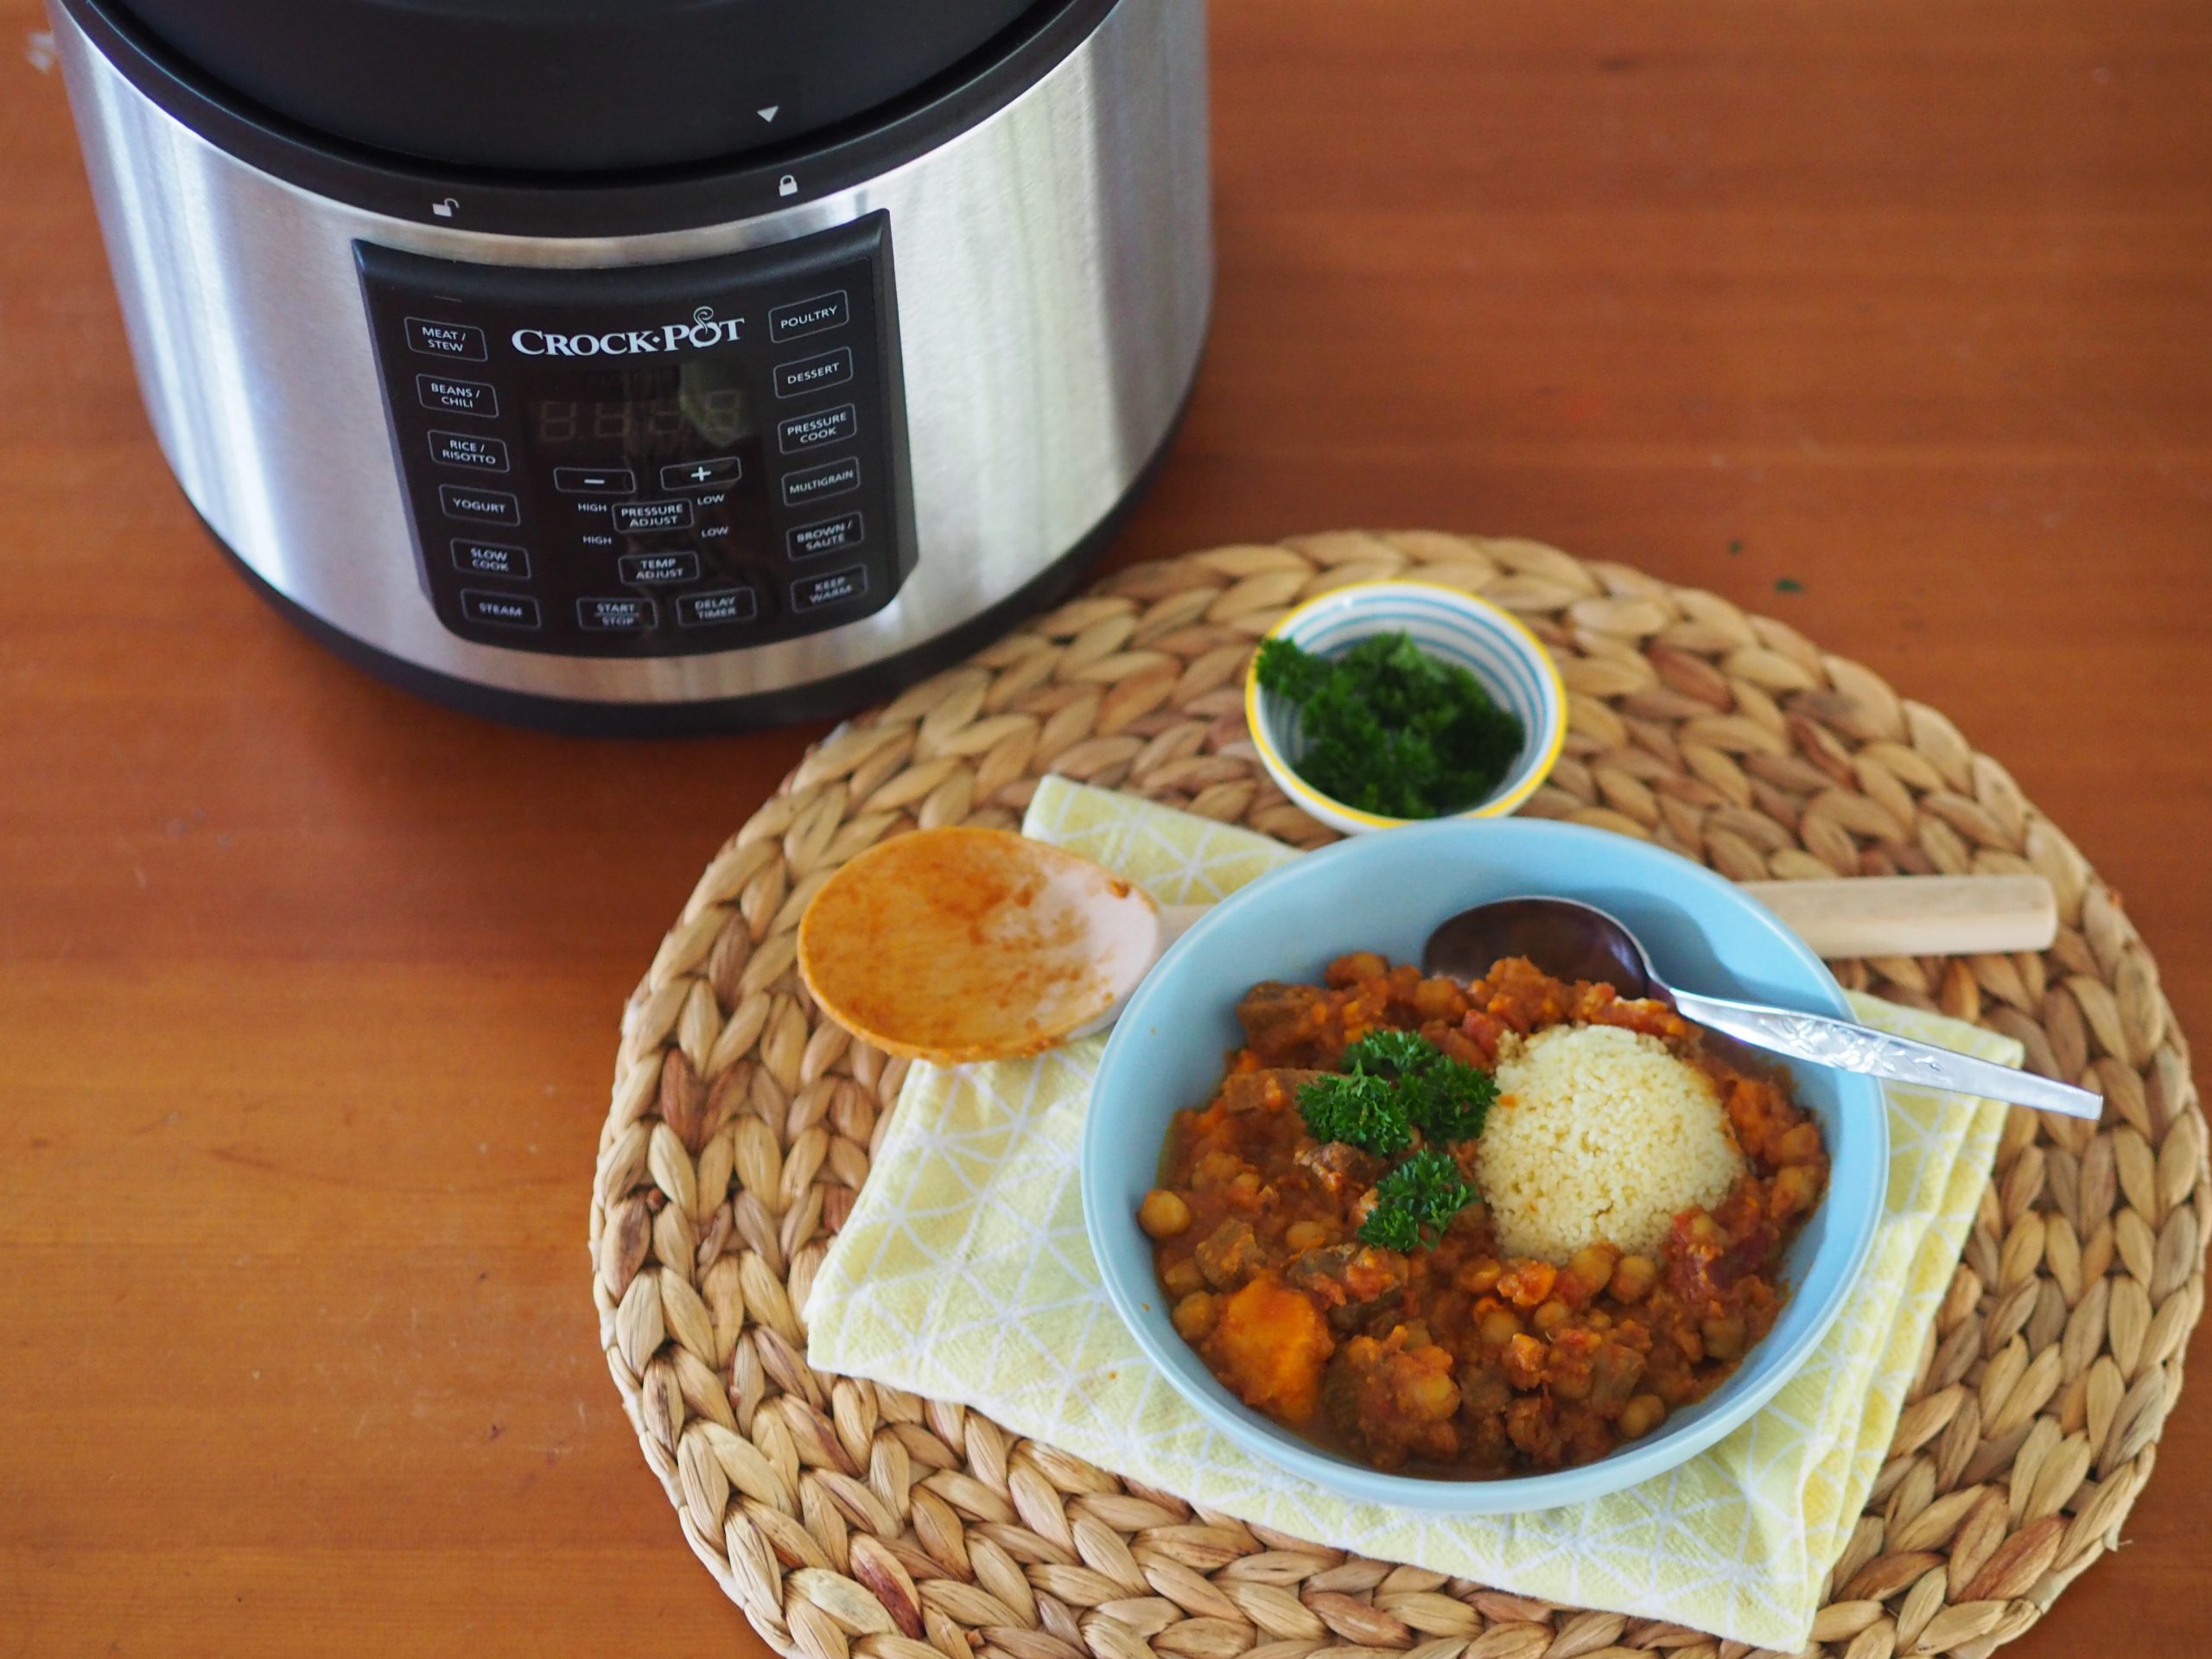 How the Crock-Pot Express Crock Multi-Cooker saved us from our